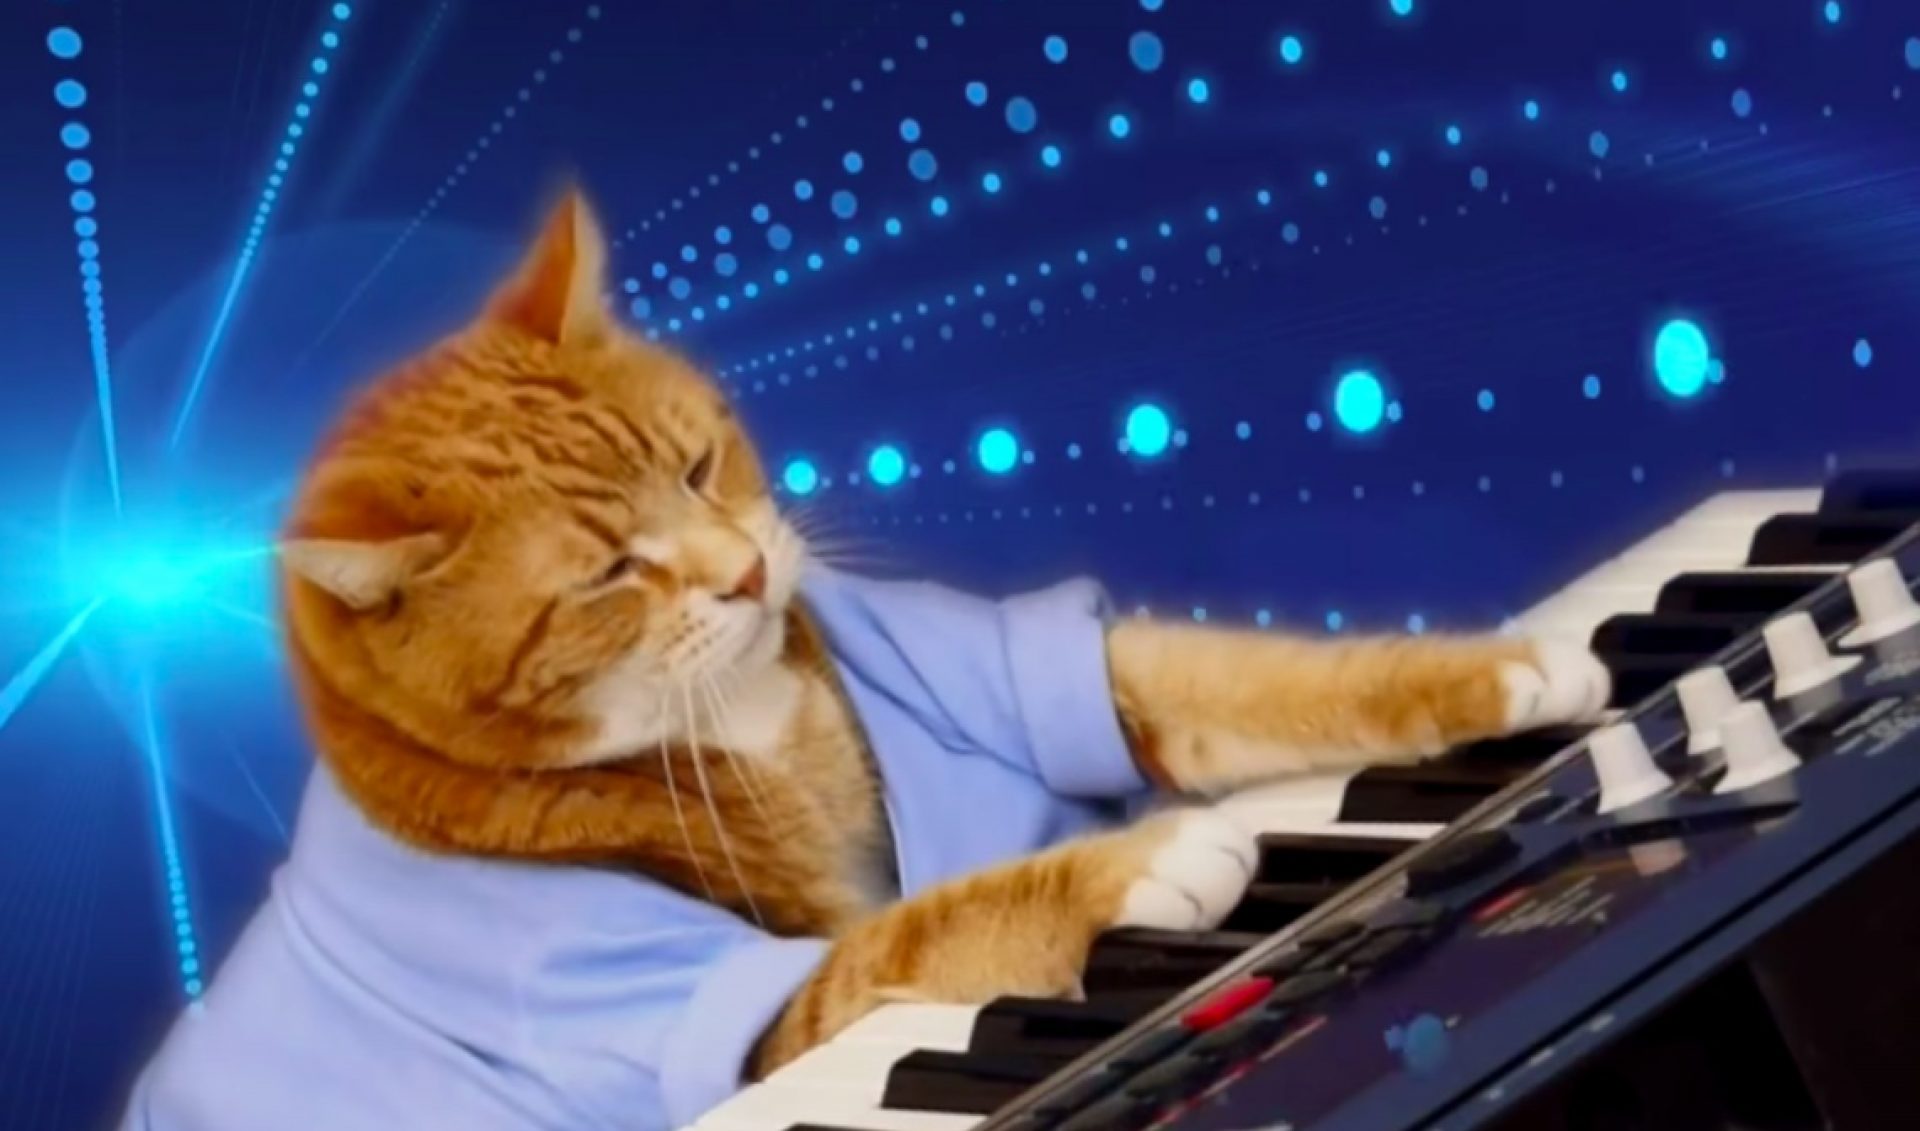 Bento, A Feline Known For Appearing In ‘Keyboard Cat’ Videos, Has Died